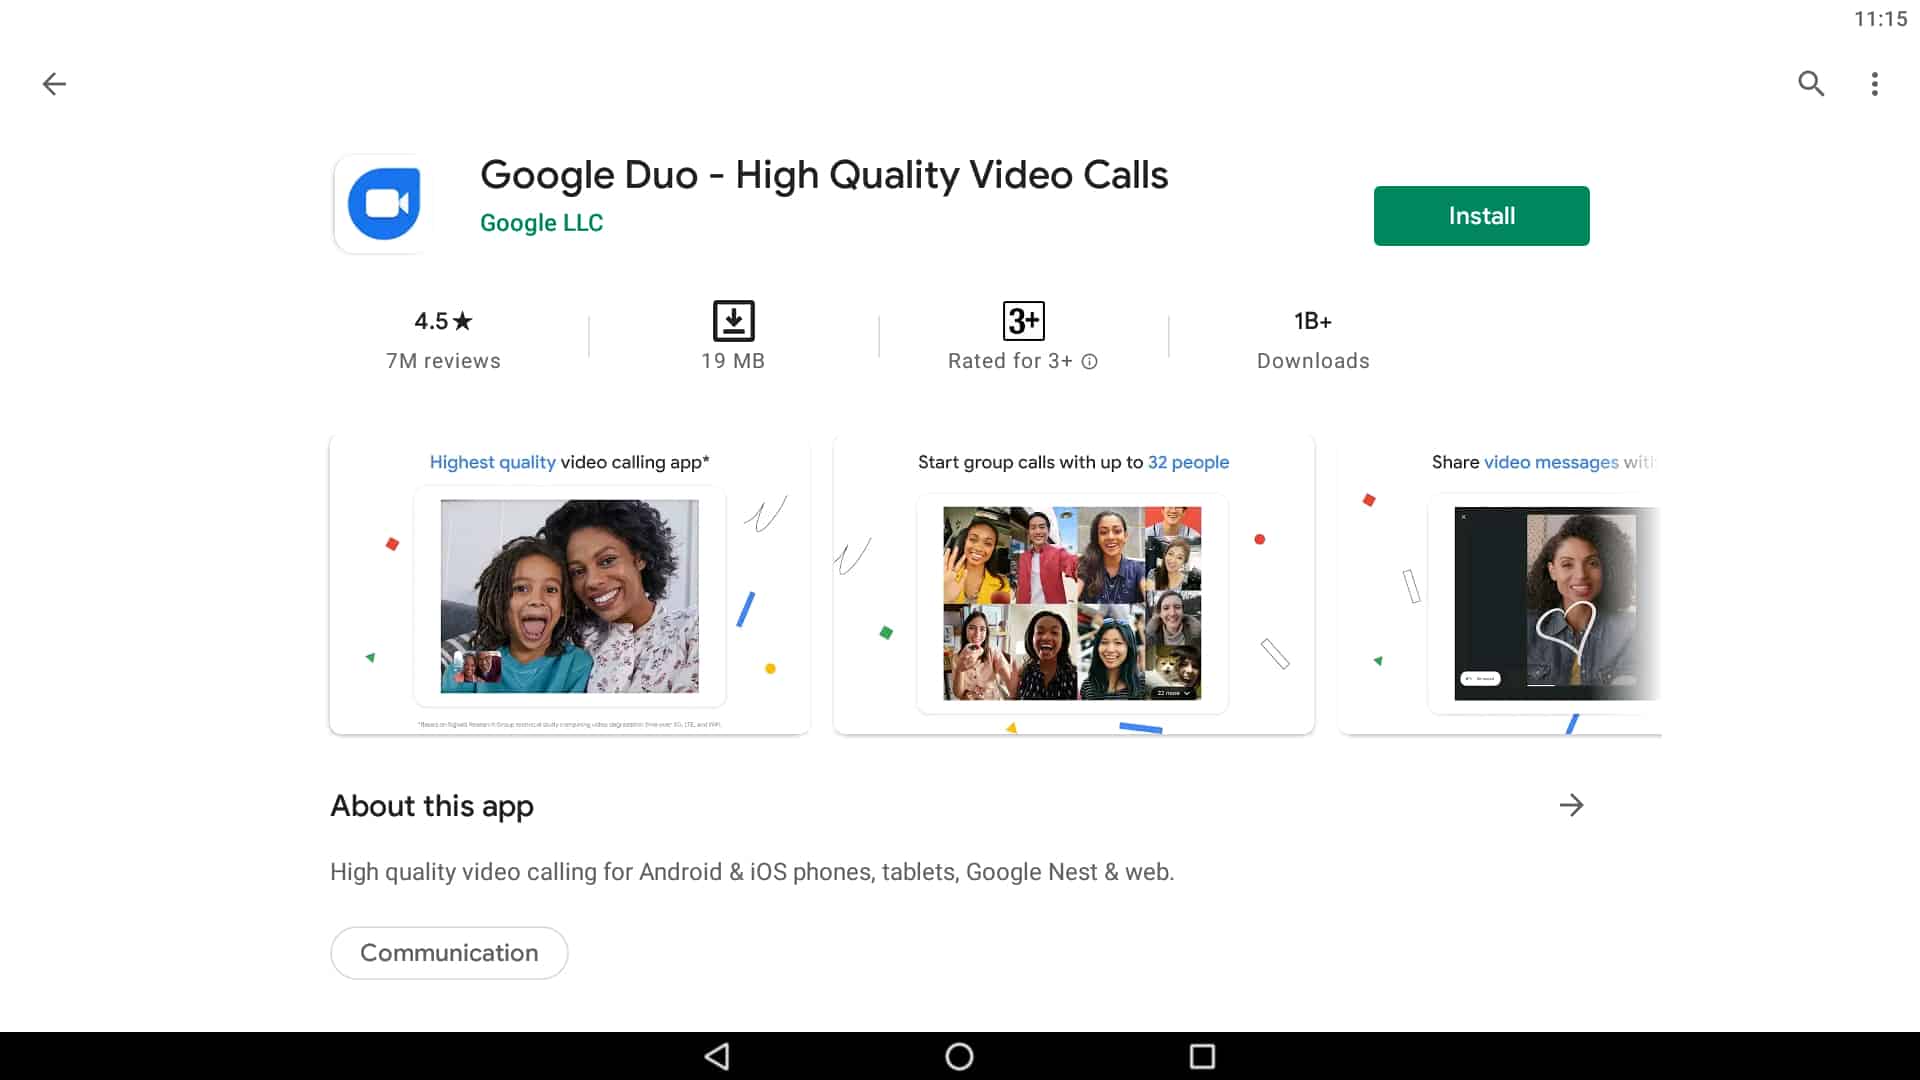 download google duo to pc